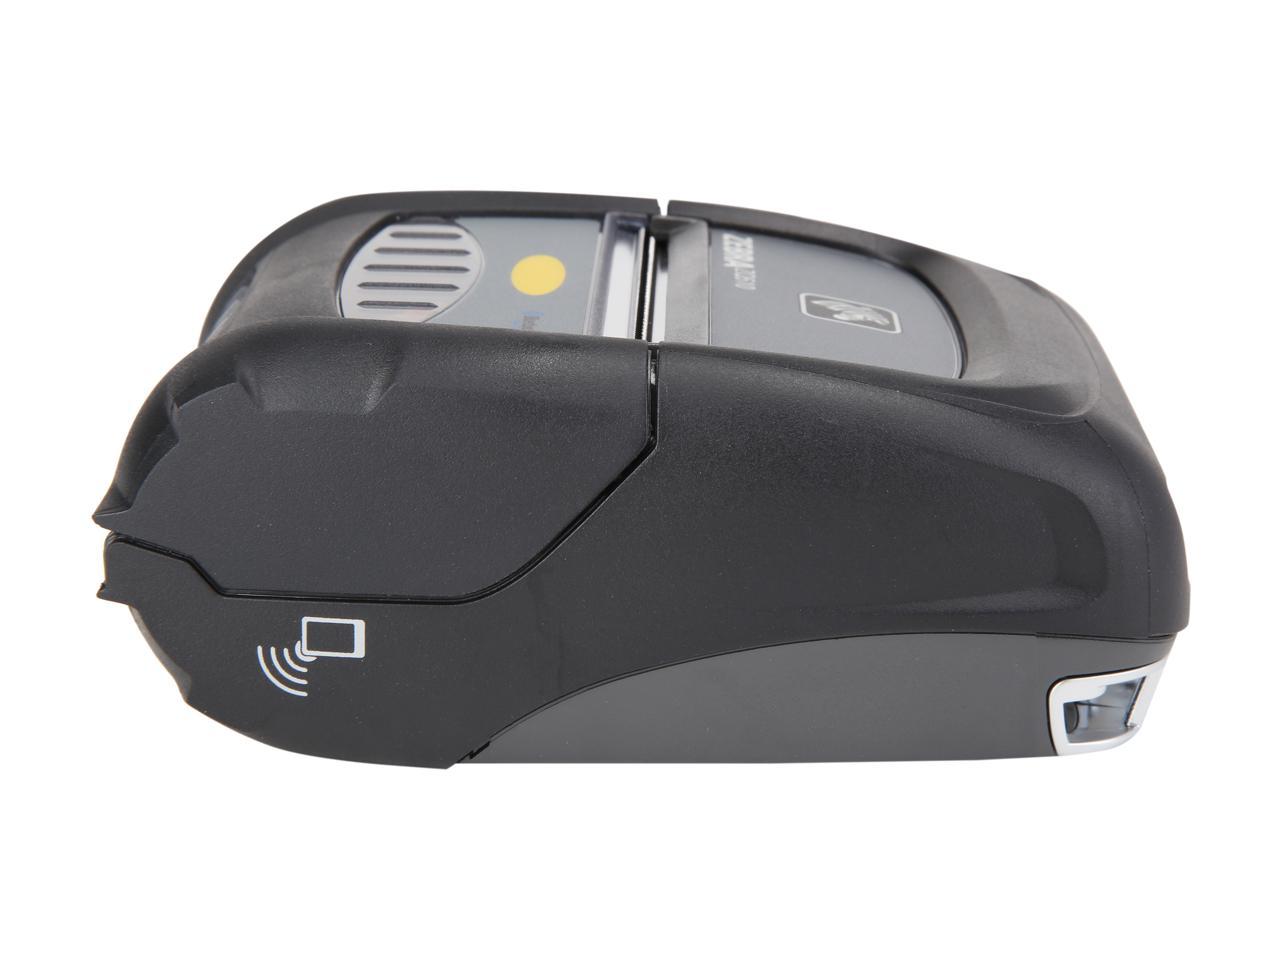 Zebra Zq510 3 Mobile Direct Thermal Receipt And Label Printer 203 Dpi Bluetooth 40 Linered 9993